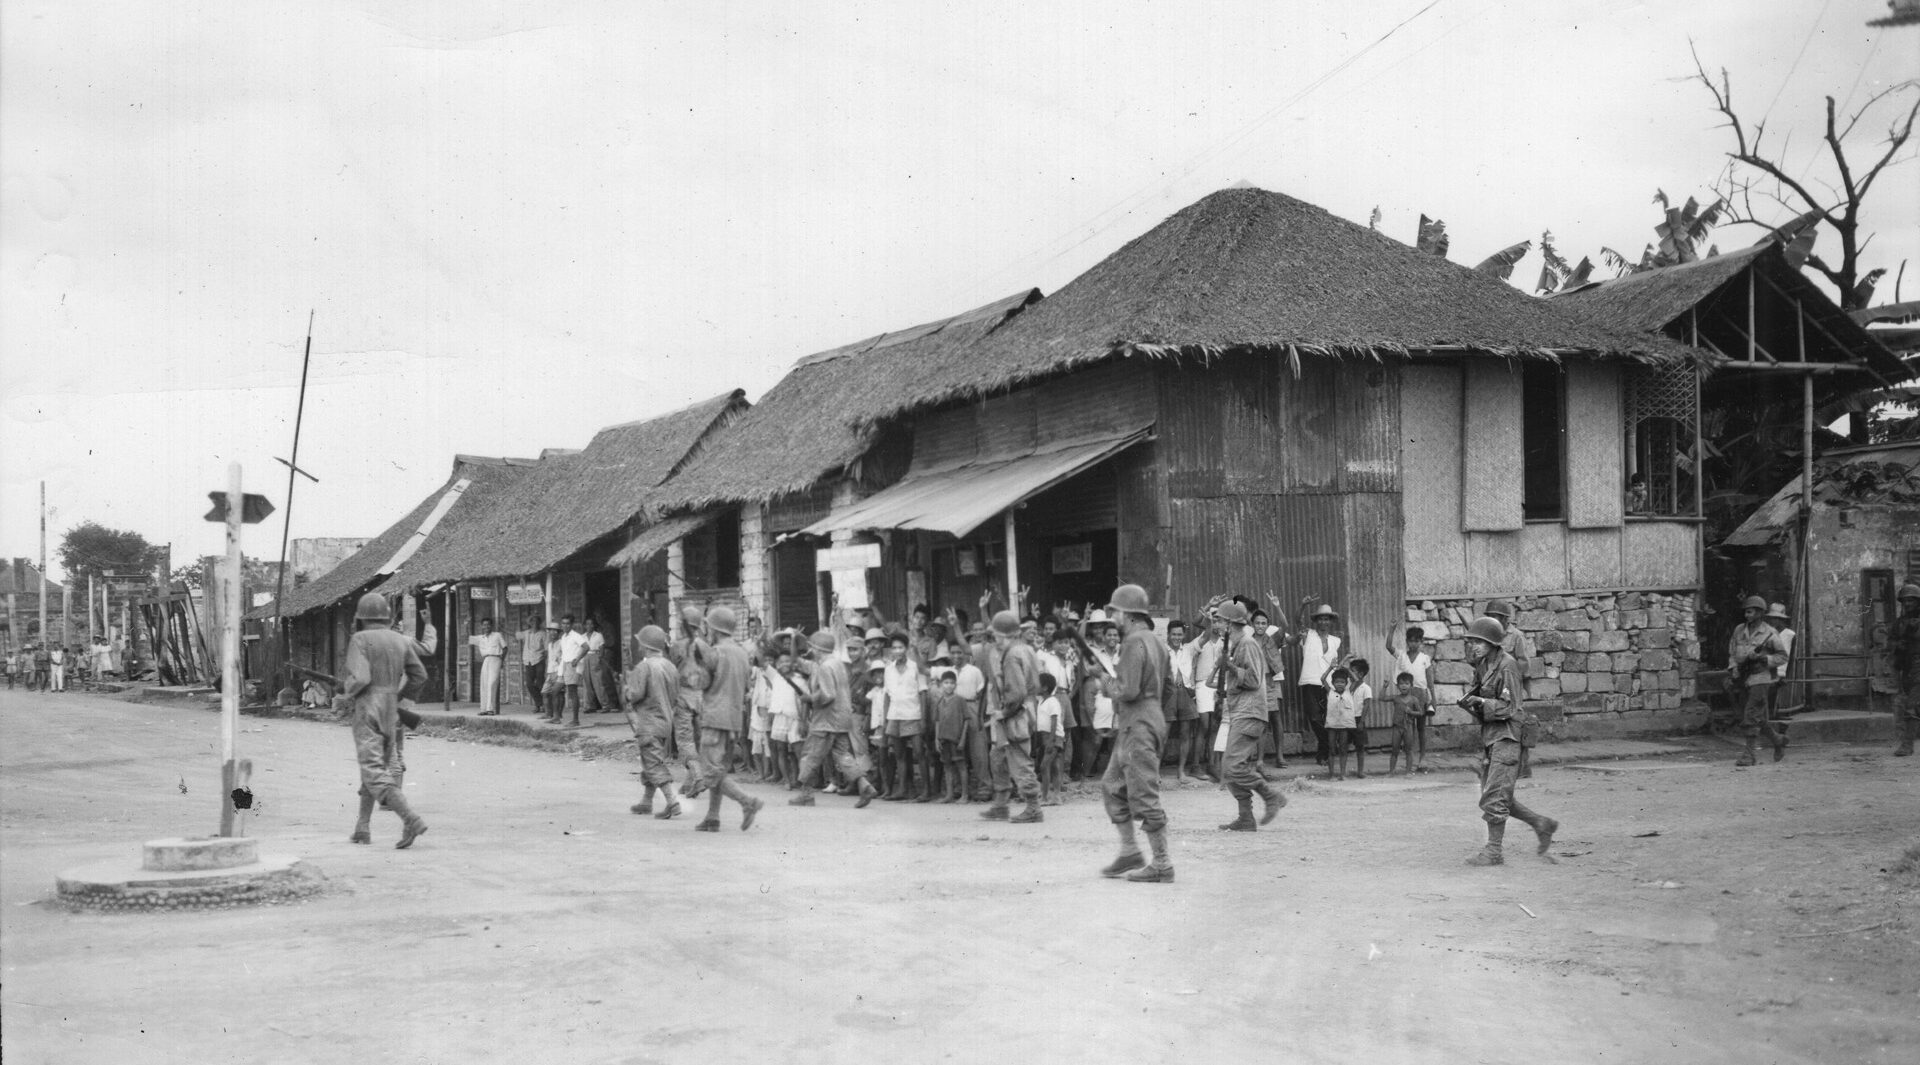 The townspeople of Balanga on the Bataan Peninsula turn out to greet soldiers of the 149th Infantry Regiment, 38th Division, steadily advancing against the Japanese. The circumstances of this trek, following the route of the infamous Death March of 1942, were quite different from the earlier tragic event that claimed many American and Filipino lives.